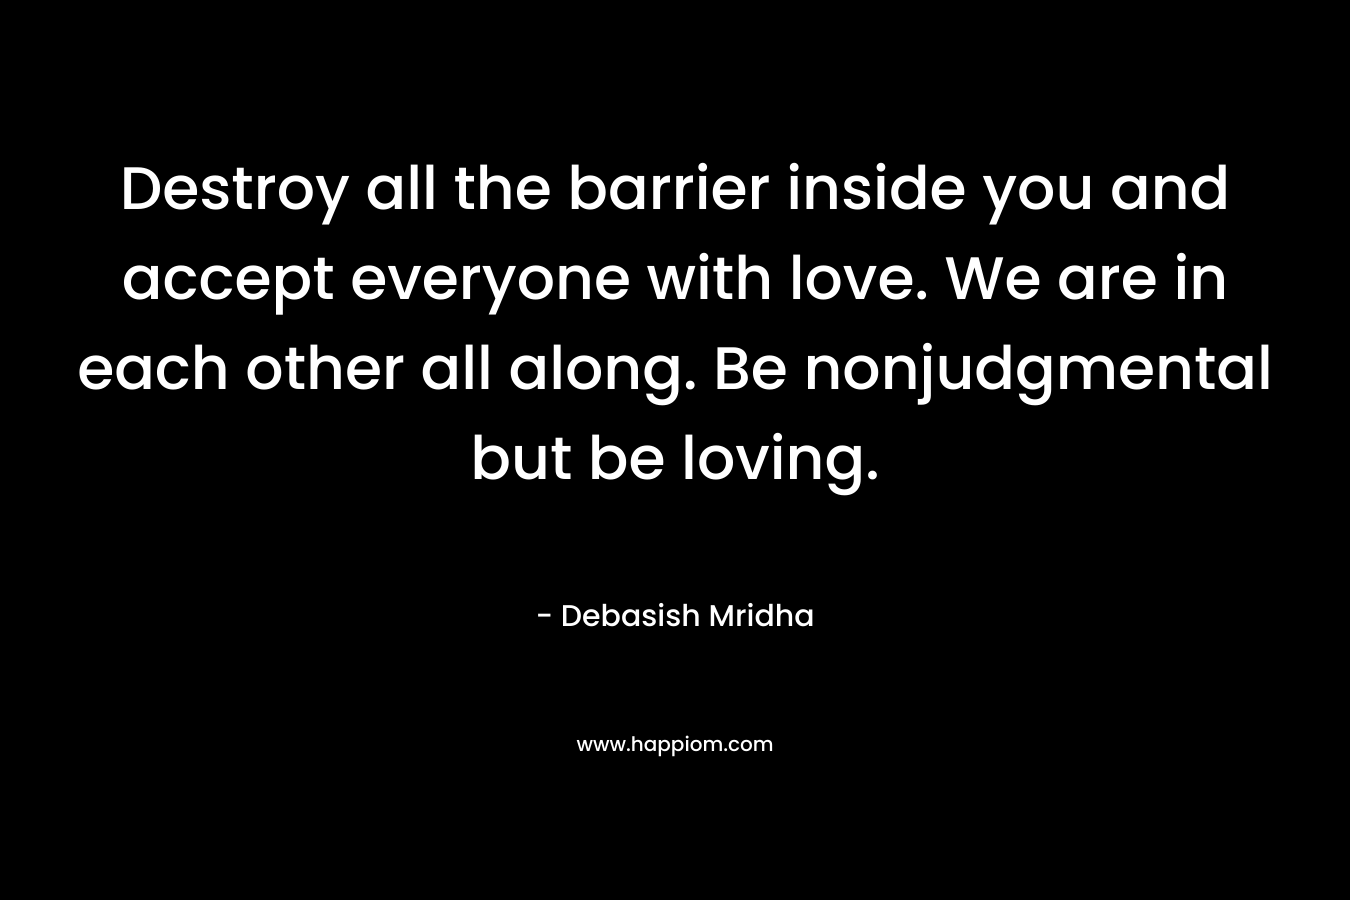 Destroy all the barrier inside you and accept everyone with love. We are in each other all along. Be nonjudgmental but be loving.